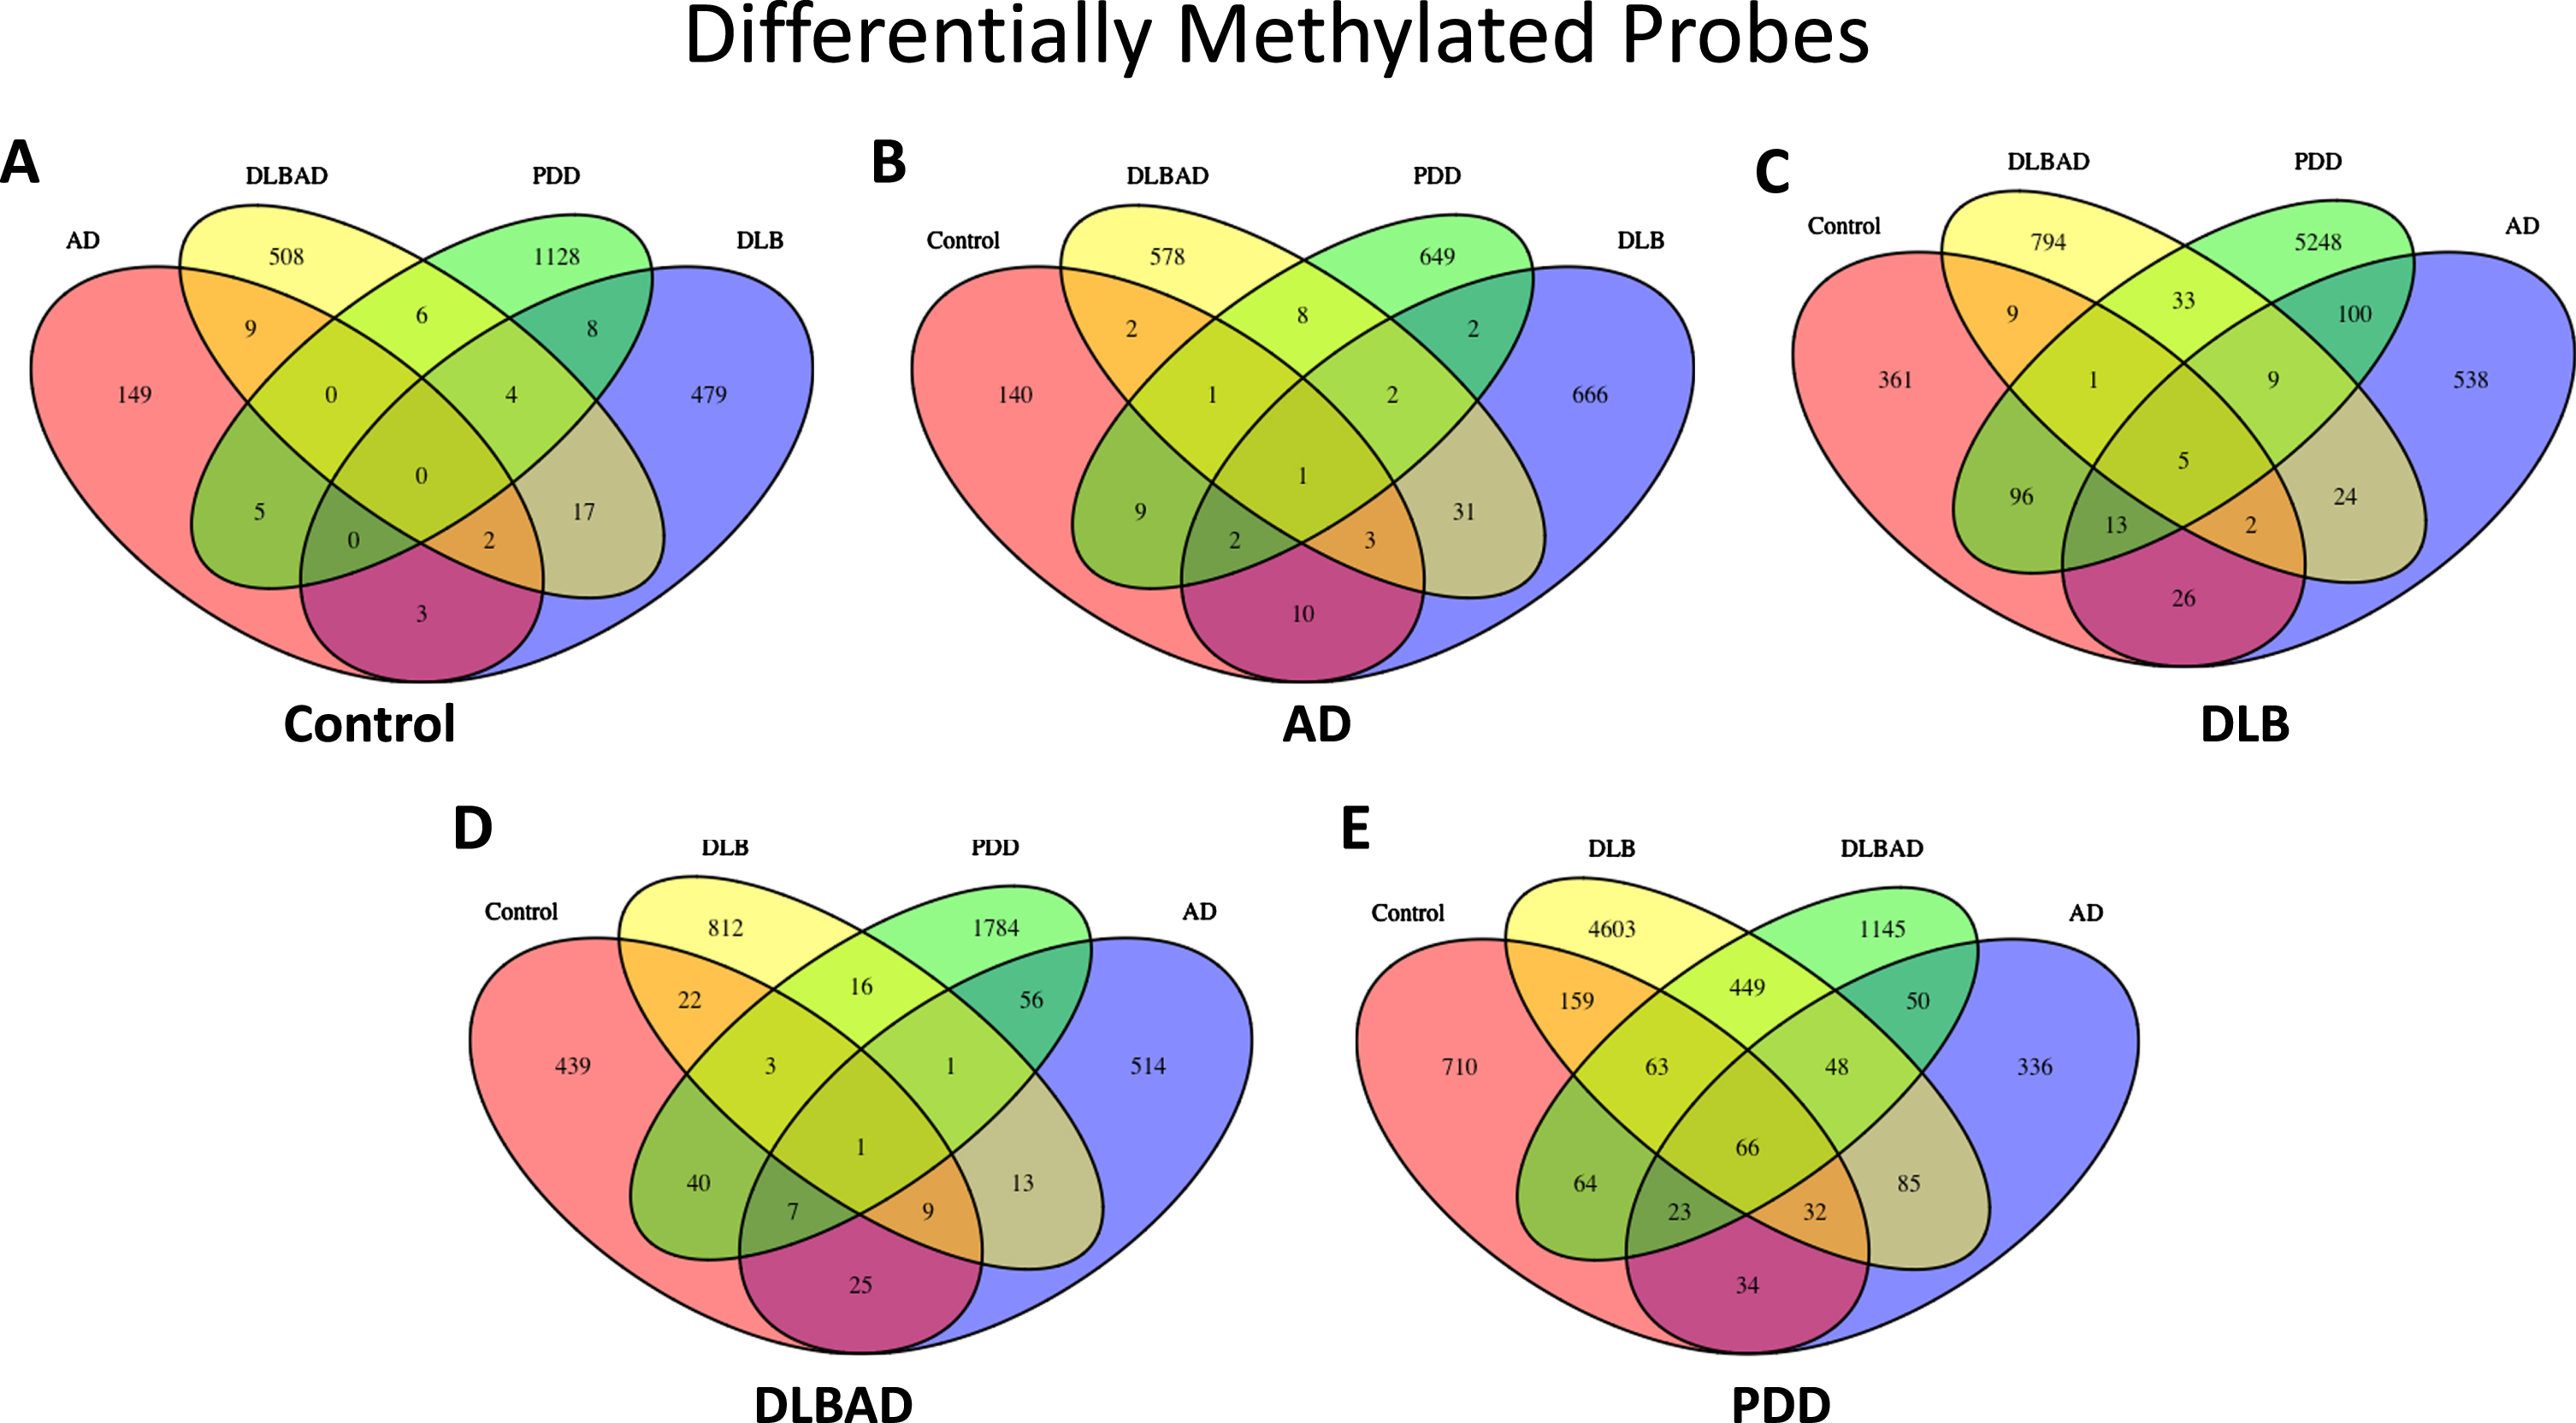 Differentially methylated probes (DMPs). A) Total DMPs when comparing Control to all dementia types. B) Total DMPs when comparing AD to Control and all dementia types. C) Total DMPs when comparing DLB to Control and all dementia types. D) Total DMPs when comparing DLBAD to Control and all dementia types. E) Total DMPs when comparing PDD to Control and all dementia types